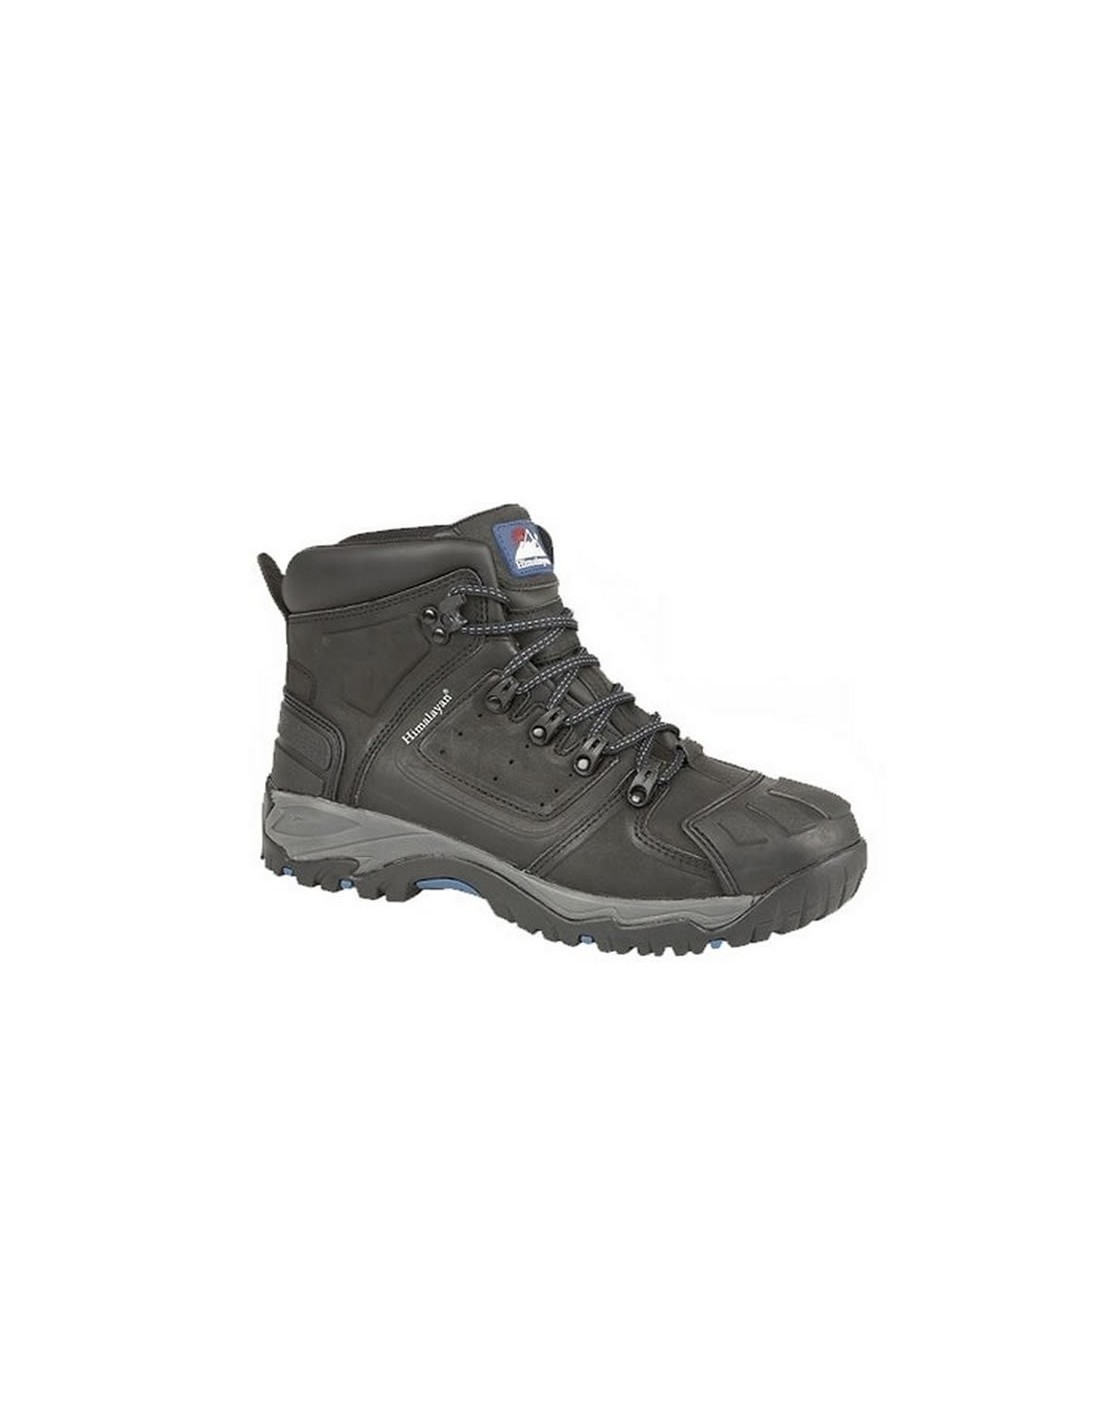 Himalayan 5206 Black Waterproof S3 SRC Safety Work Boot - Size 4 to 15